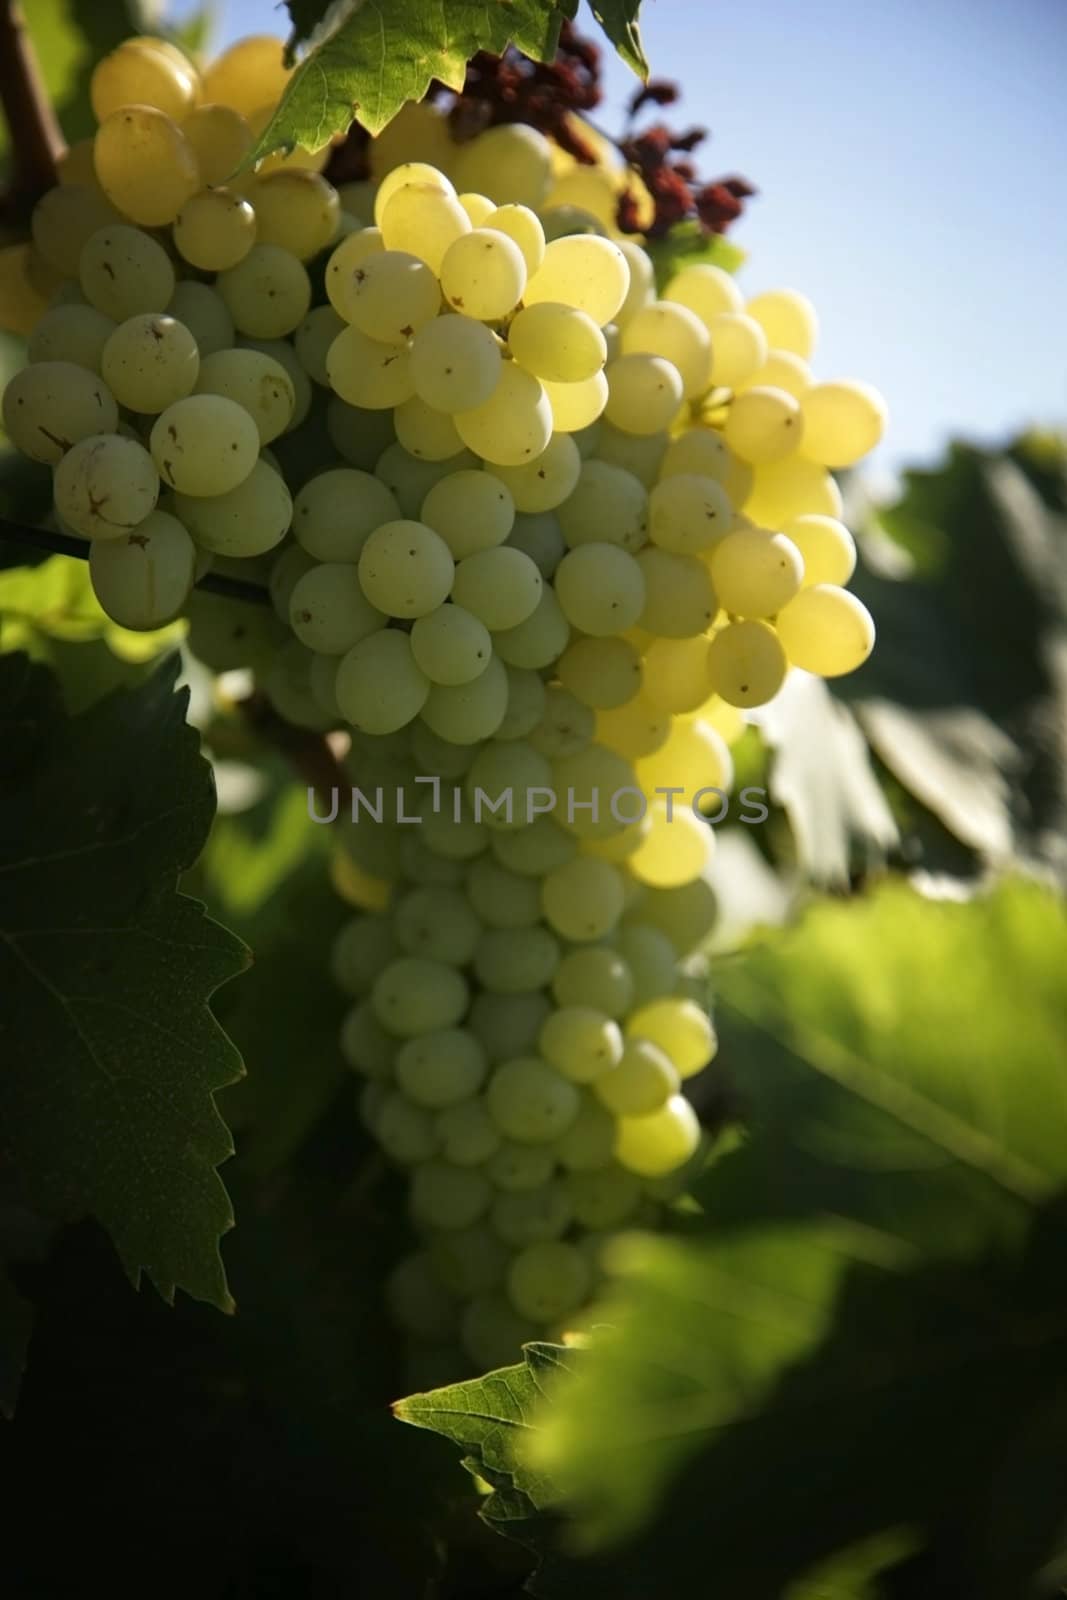 vneyard with white grapes